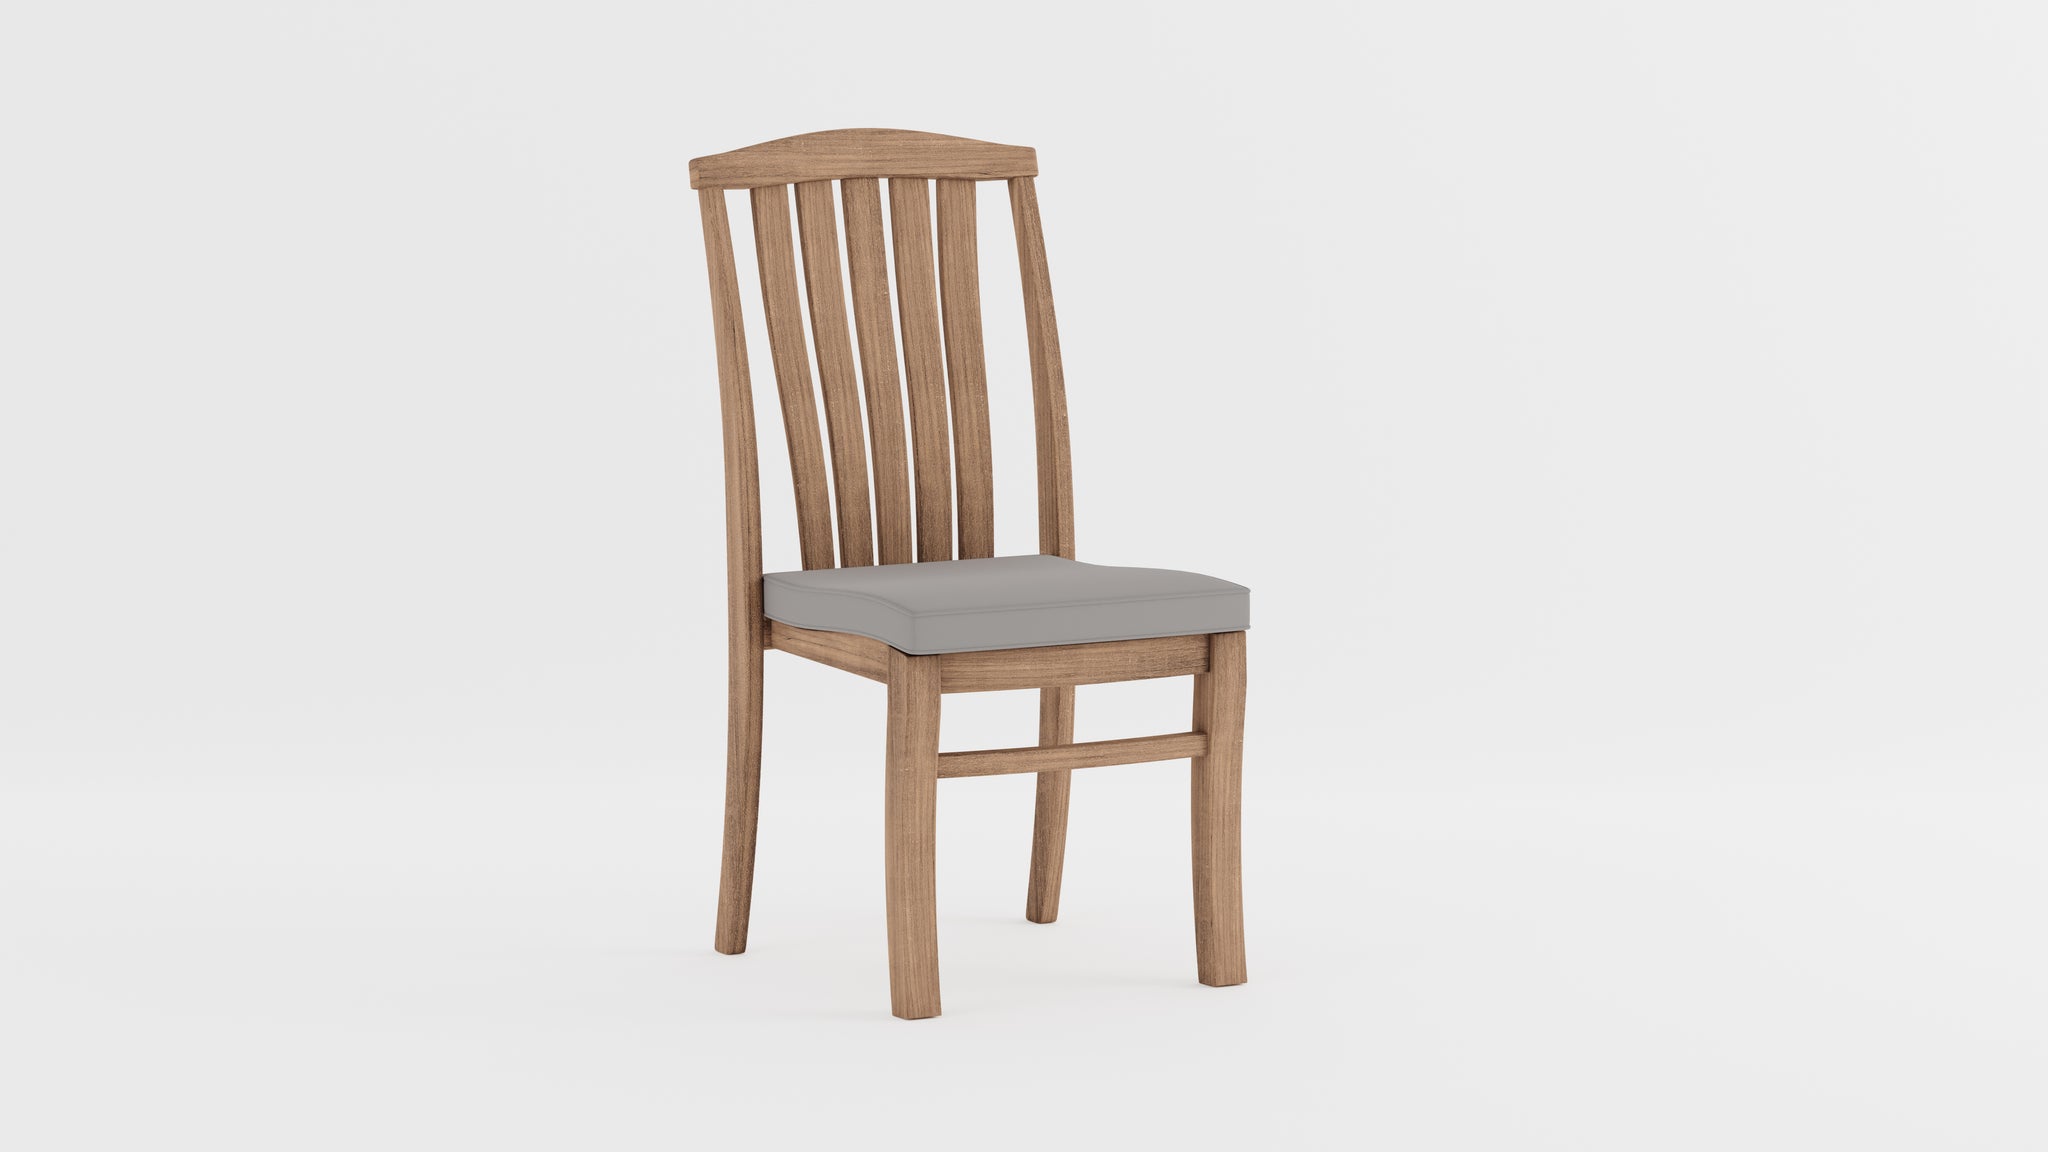 Dorchester Teak Stacking Dining Chair with Light Grey Cushion